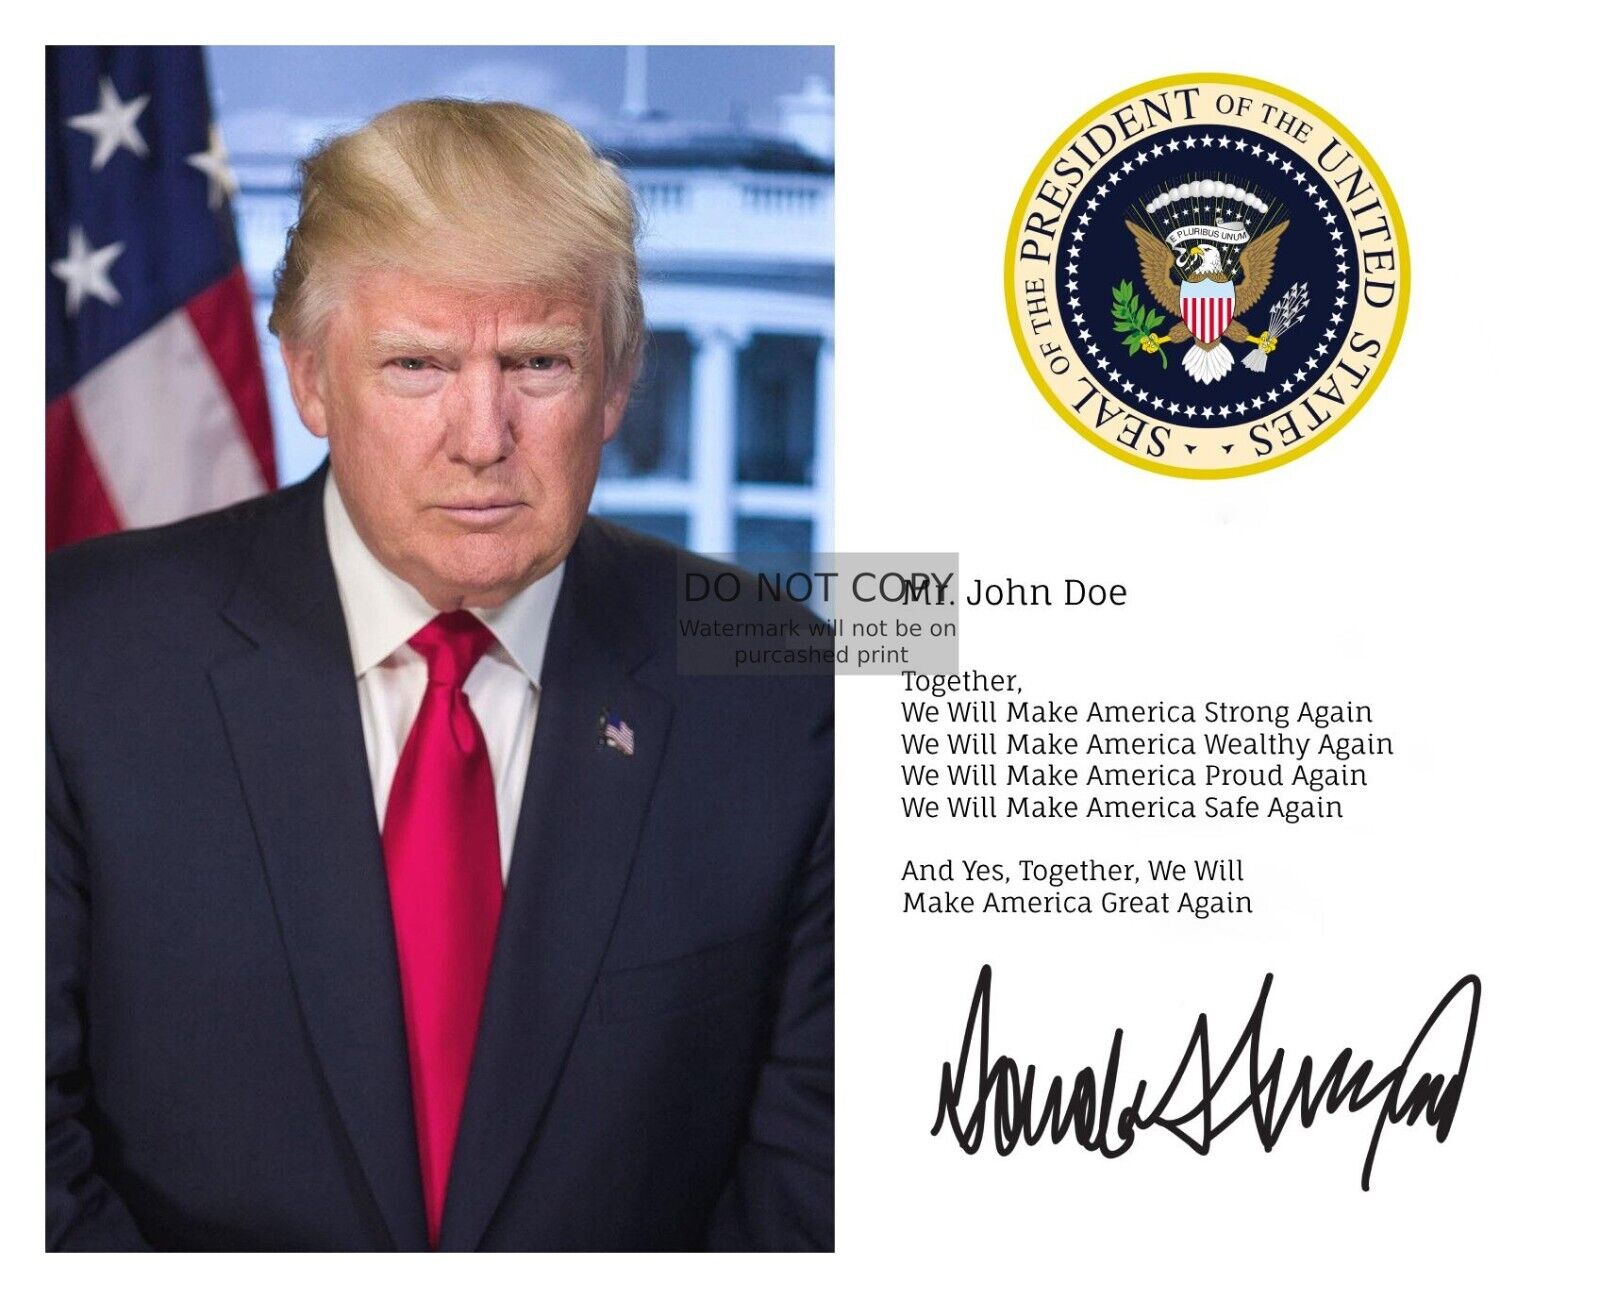 PERSONALIZED PRESIDENT DONALD TRUMP AUTOGRAPH NOTE YOUR NAME 8X10 PHOTO